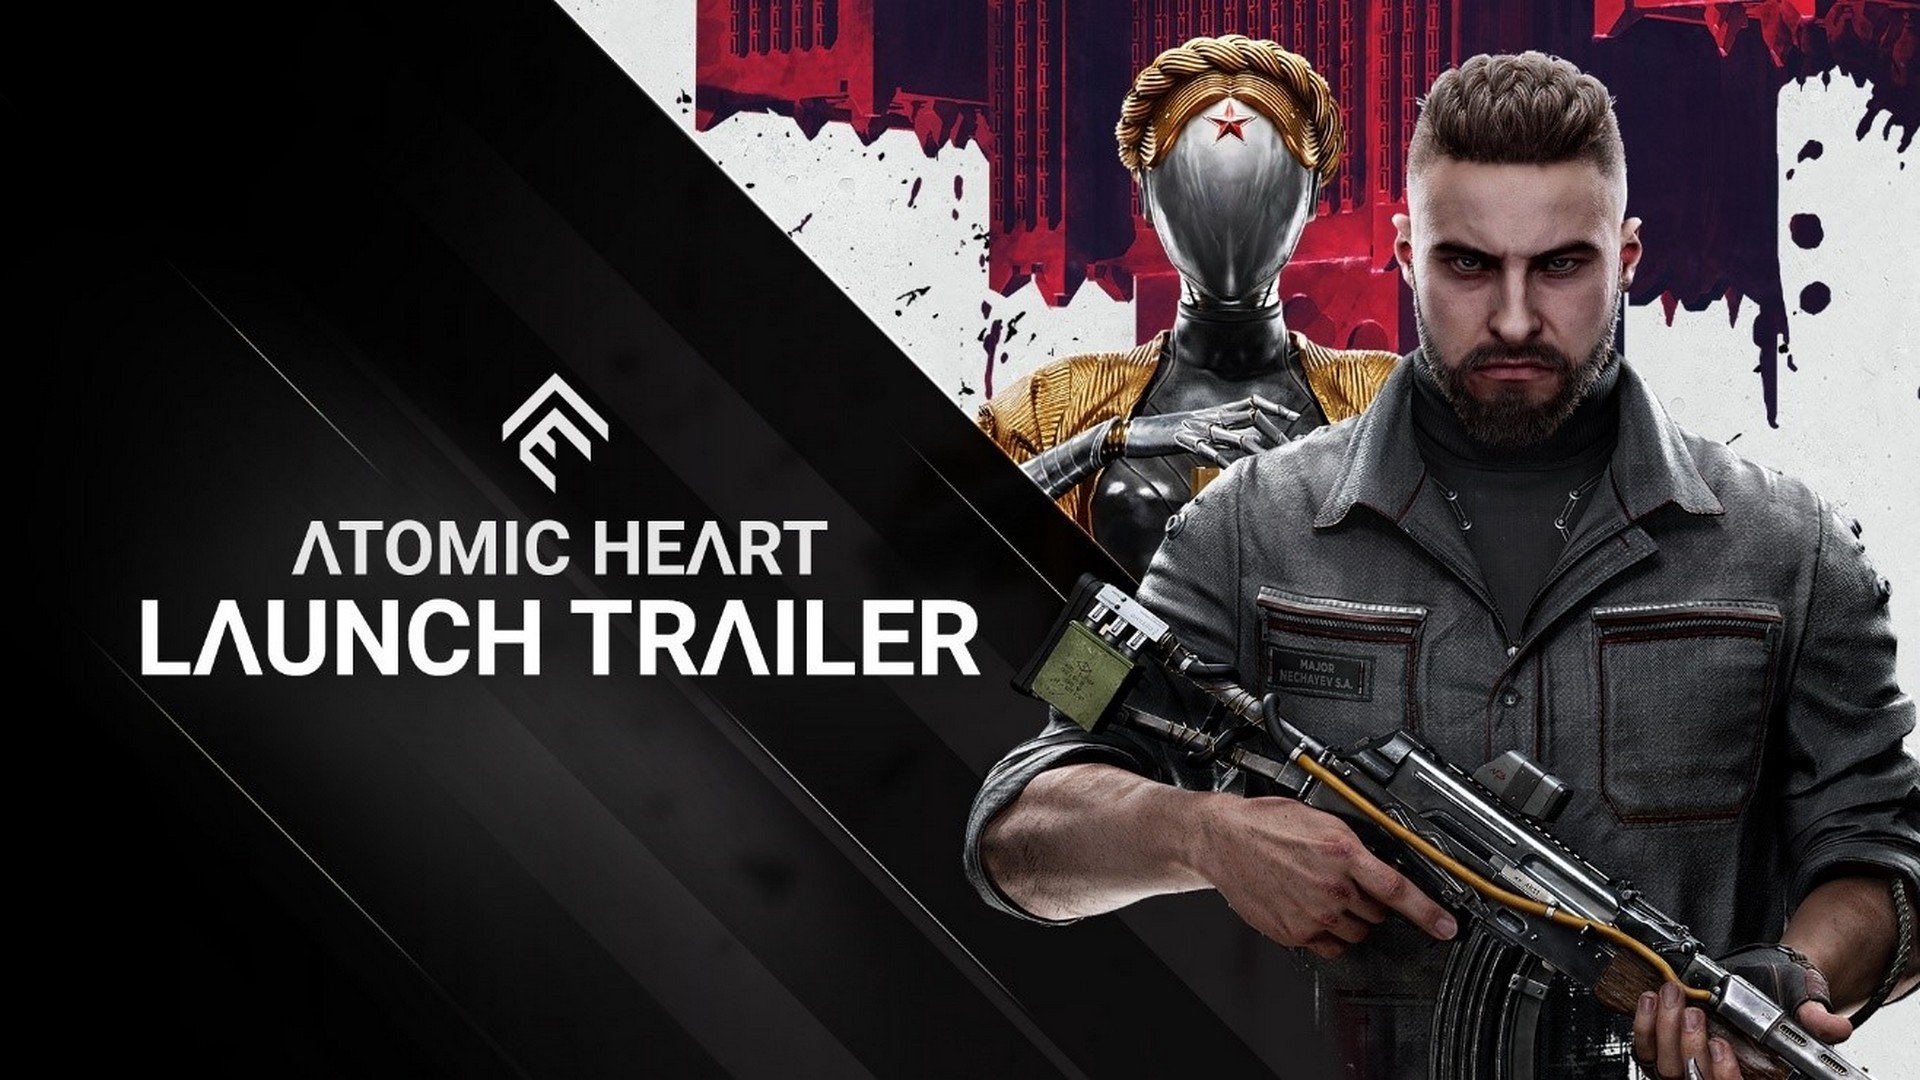 Atomic Heart Is Out Now – Let The Launch Trailer Blow Your Mind On Your Way To Chelomey